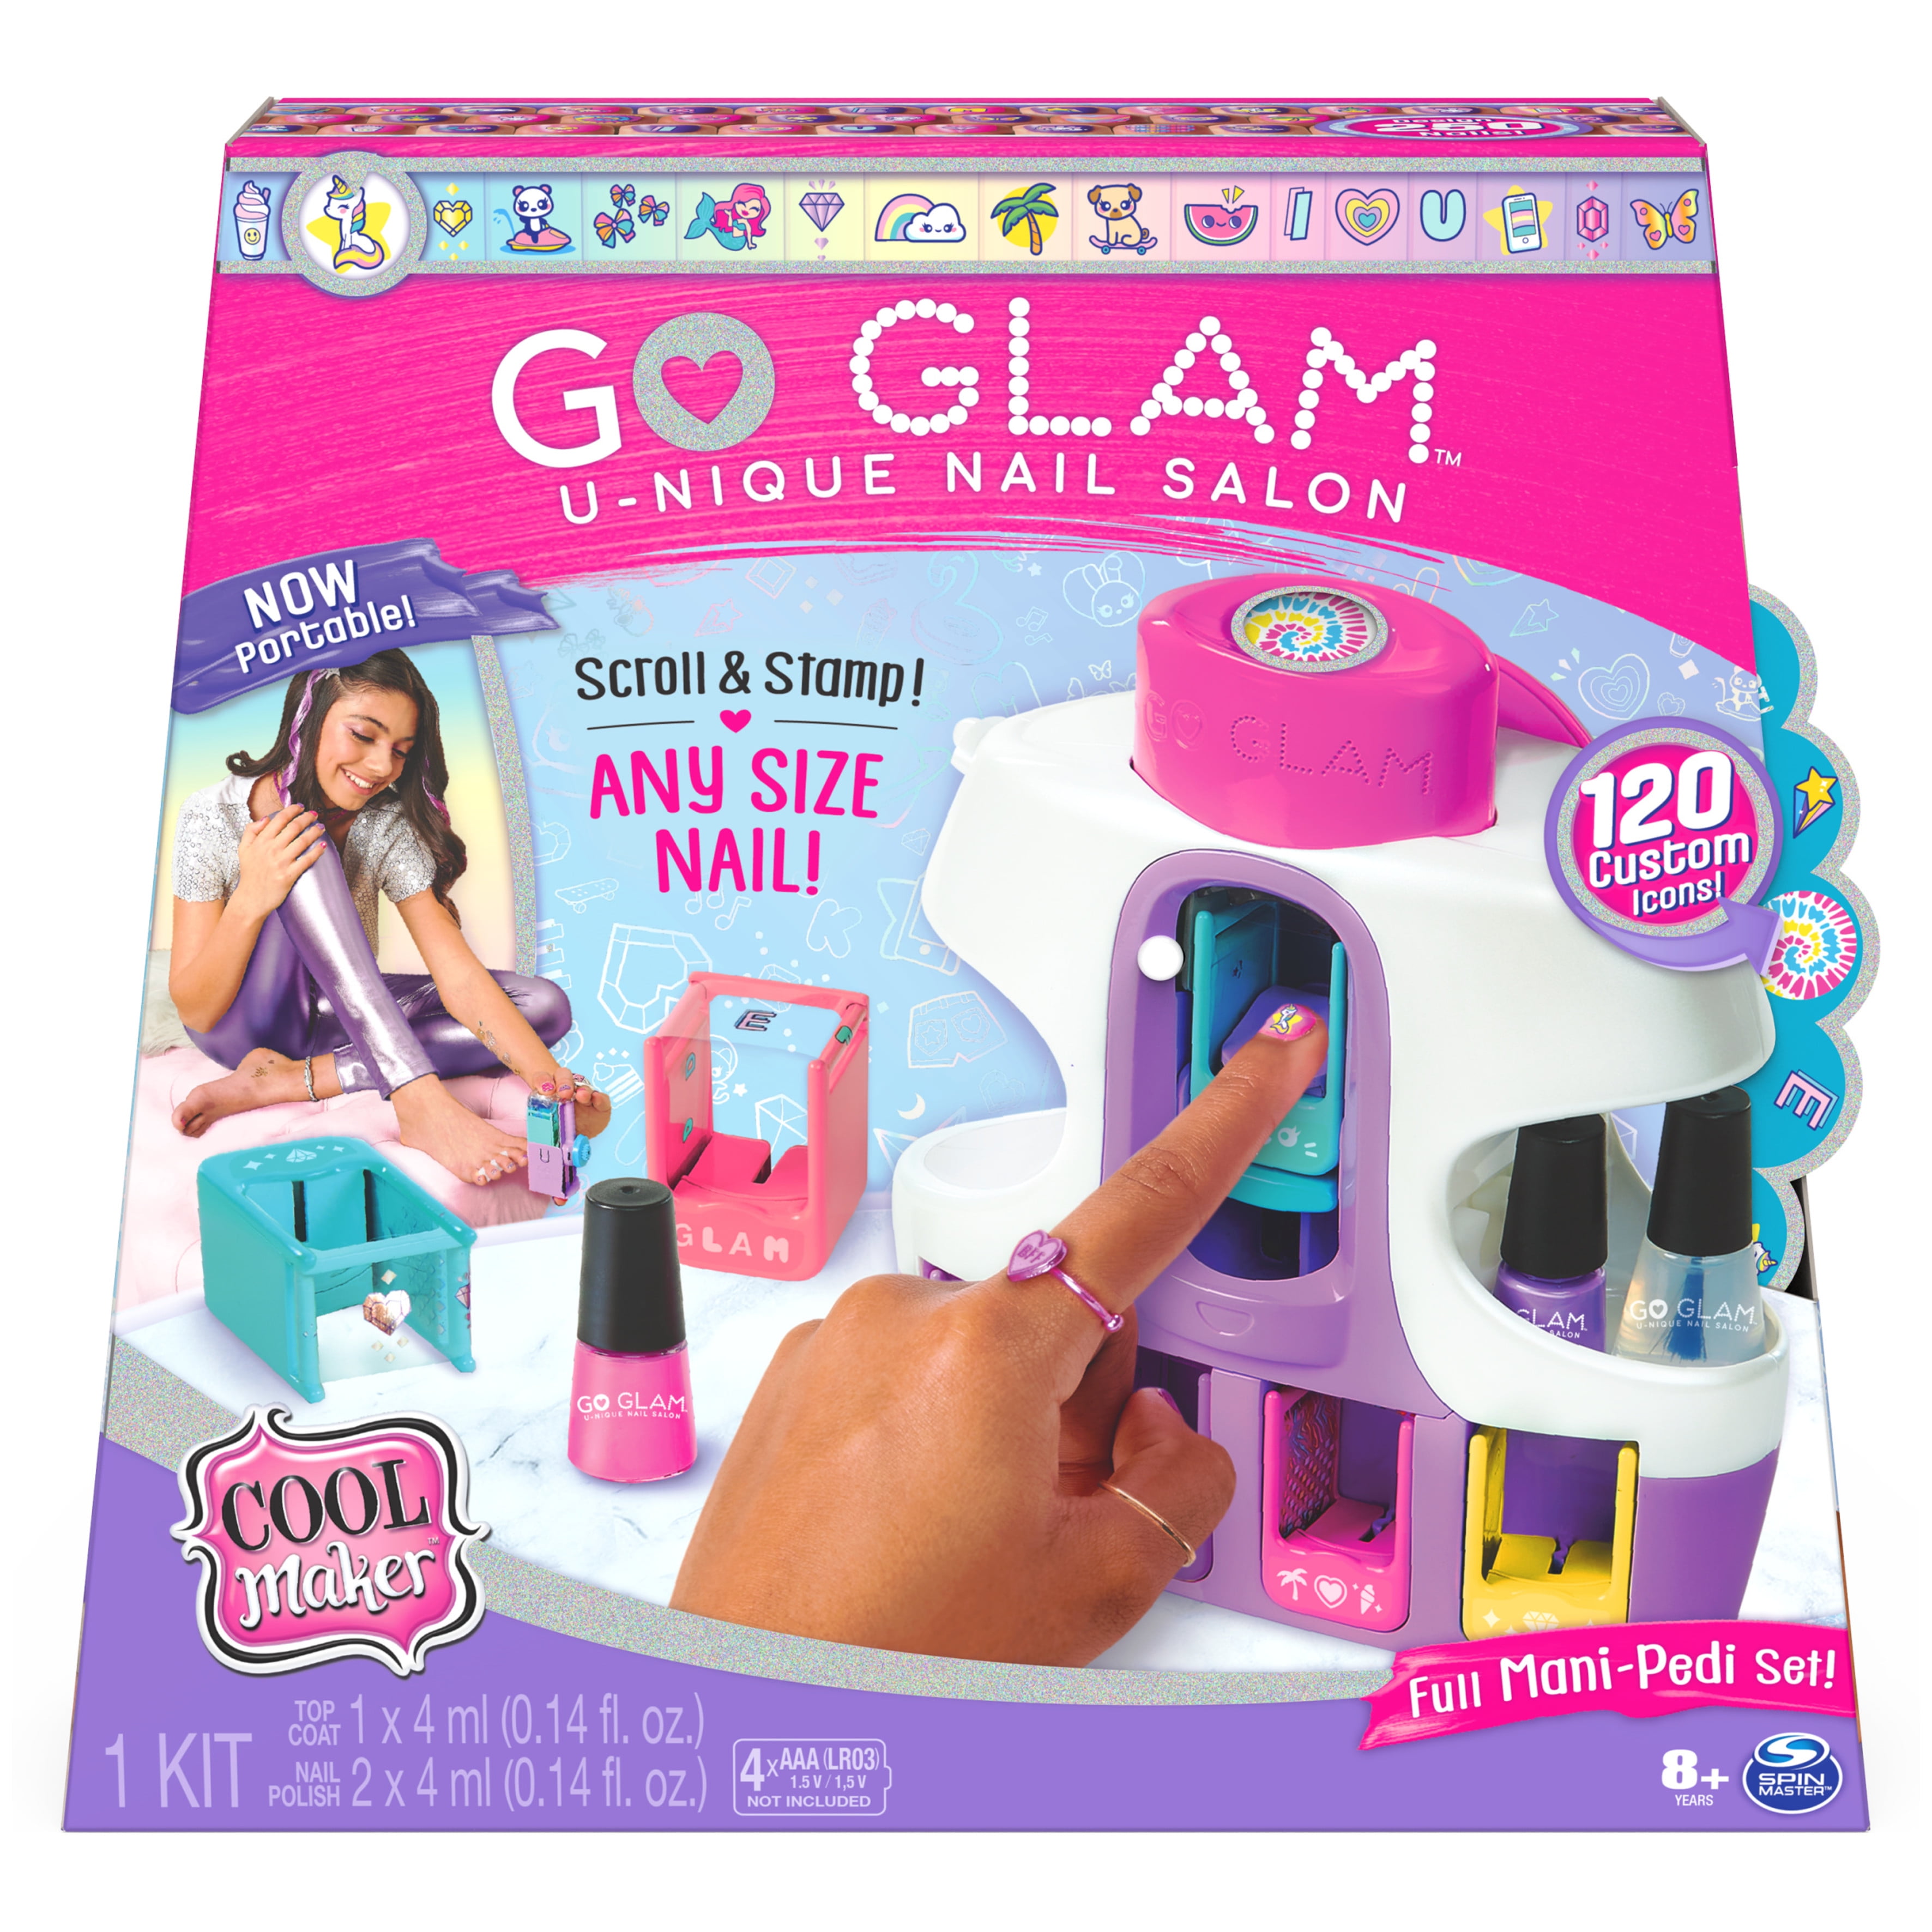 Cool Maker GO GLAM U-nique Nail Salon, for Manicures and Pedicures